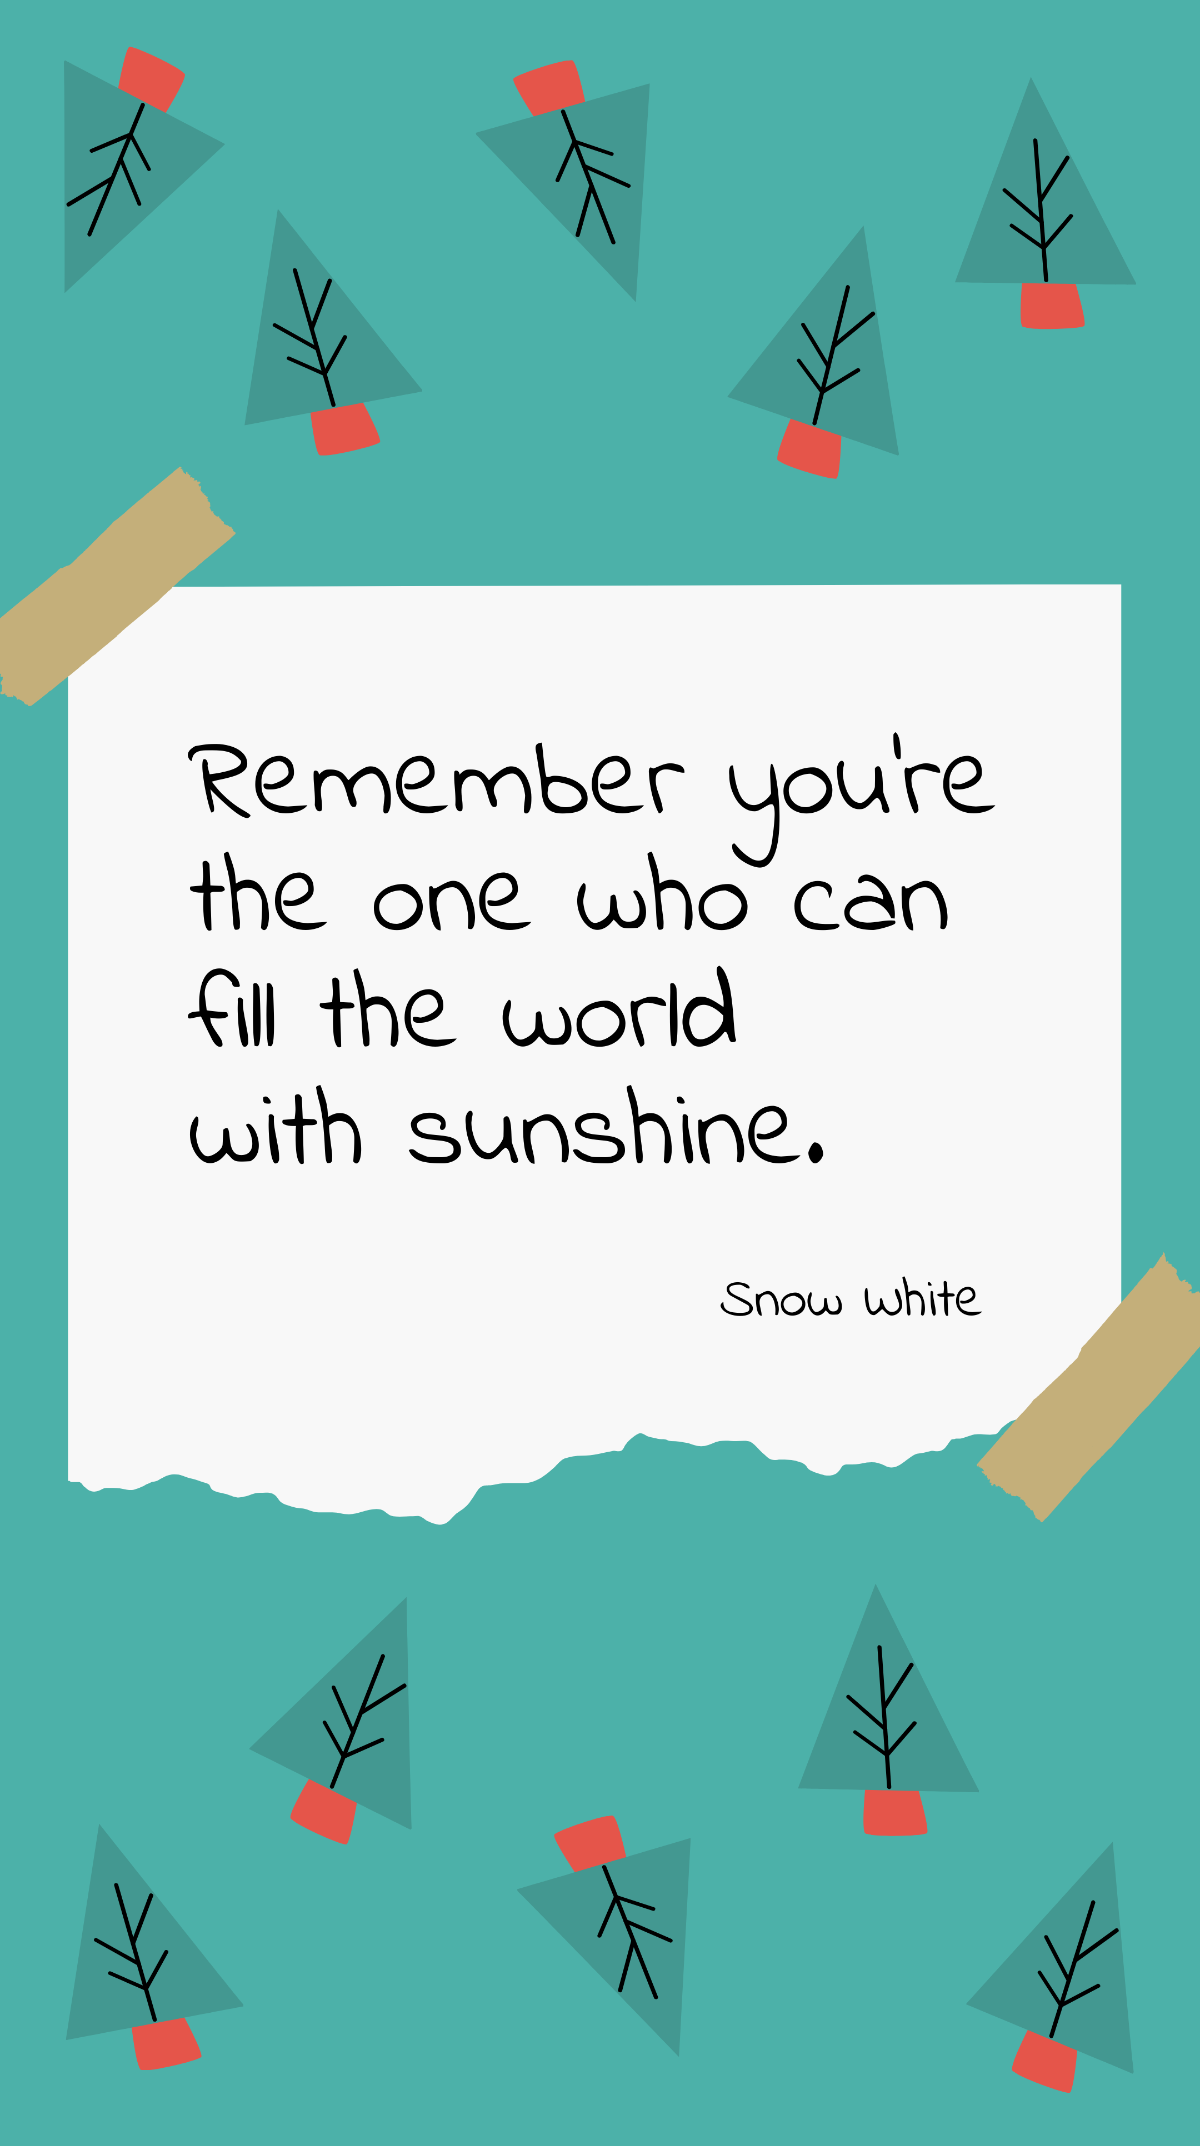 Snow White - Remember you’re the one who can fill the world with sunshine.